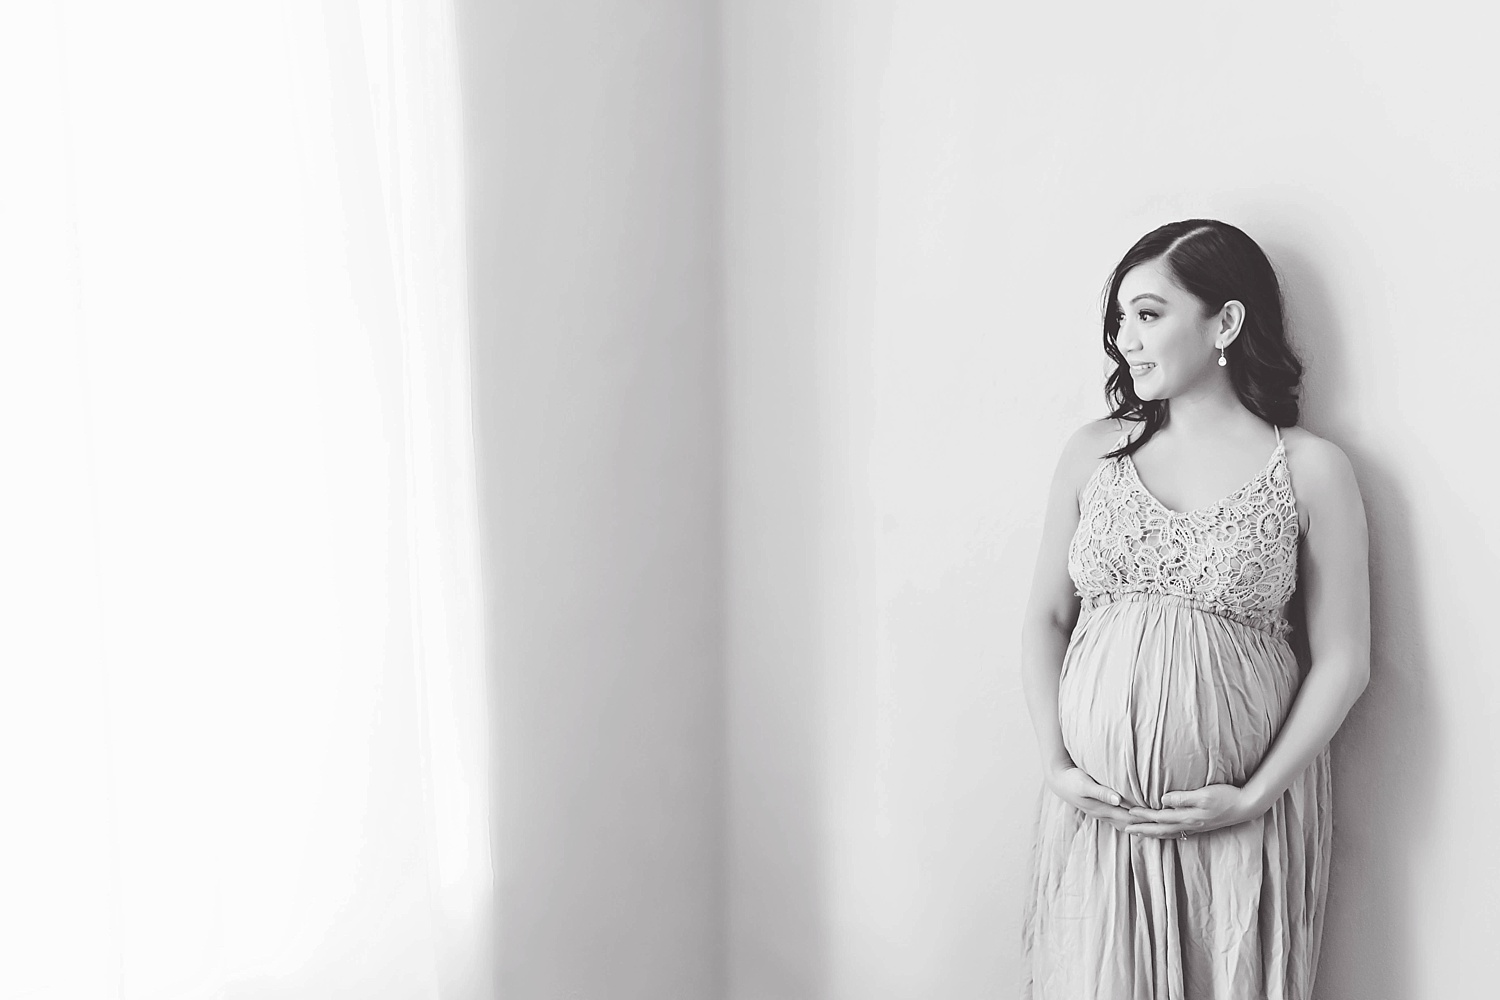  A pregnant Filipino woman wearing a flowing maternity gown leans against a wall and gazes out a window. Image by Lily Sophia Photography in Atlanta, Georgia.&nbsp; 